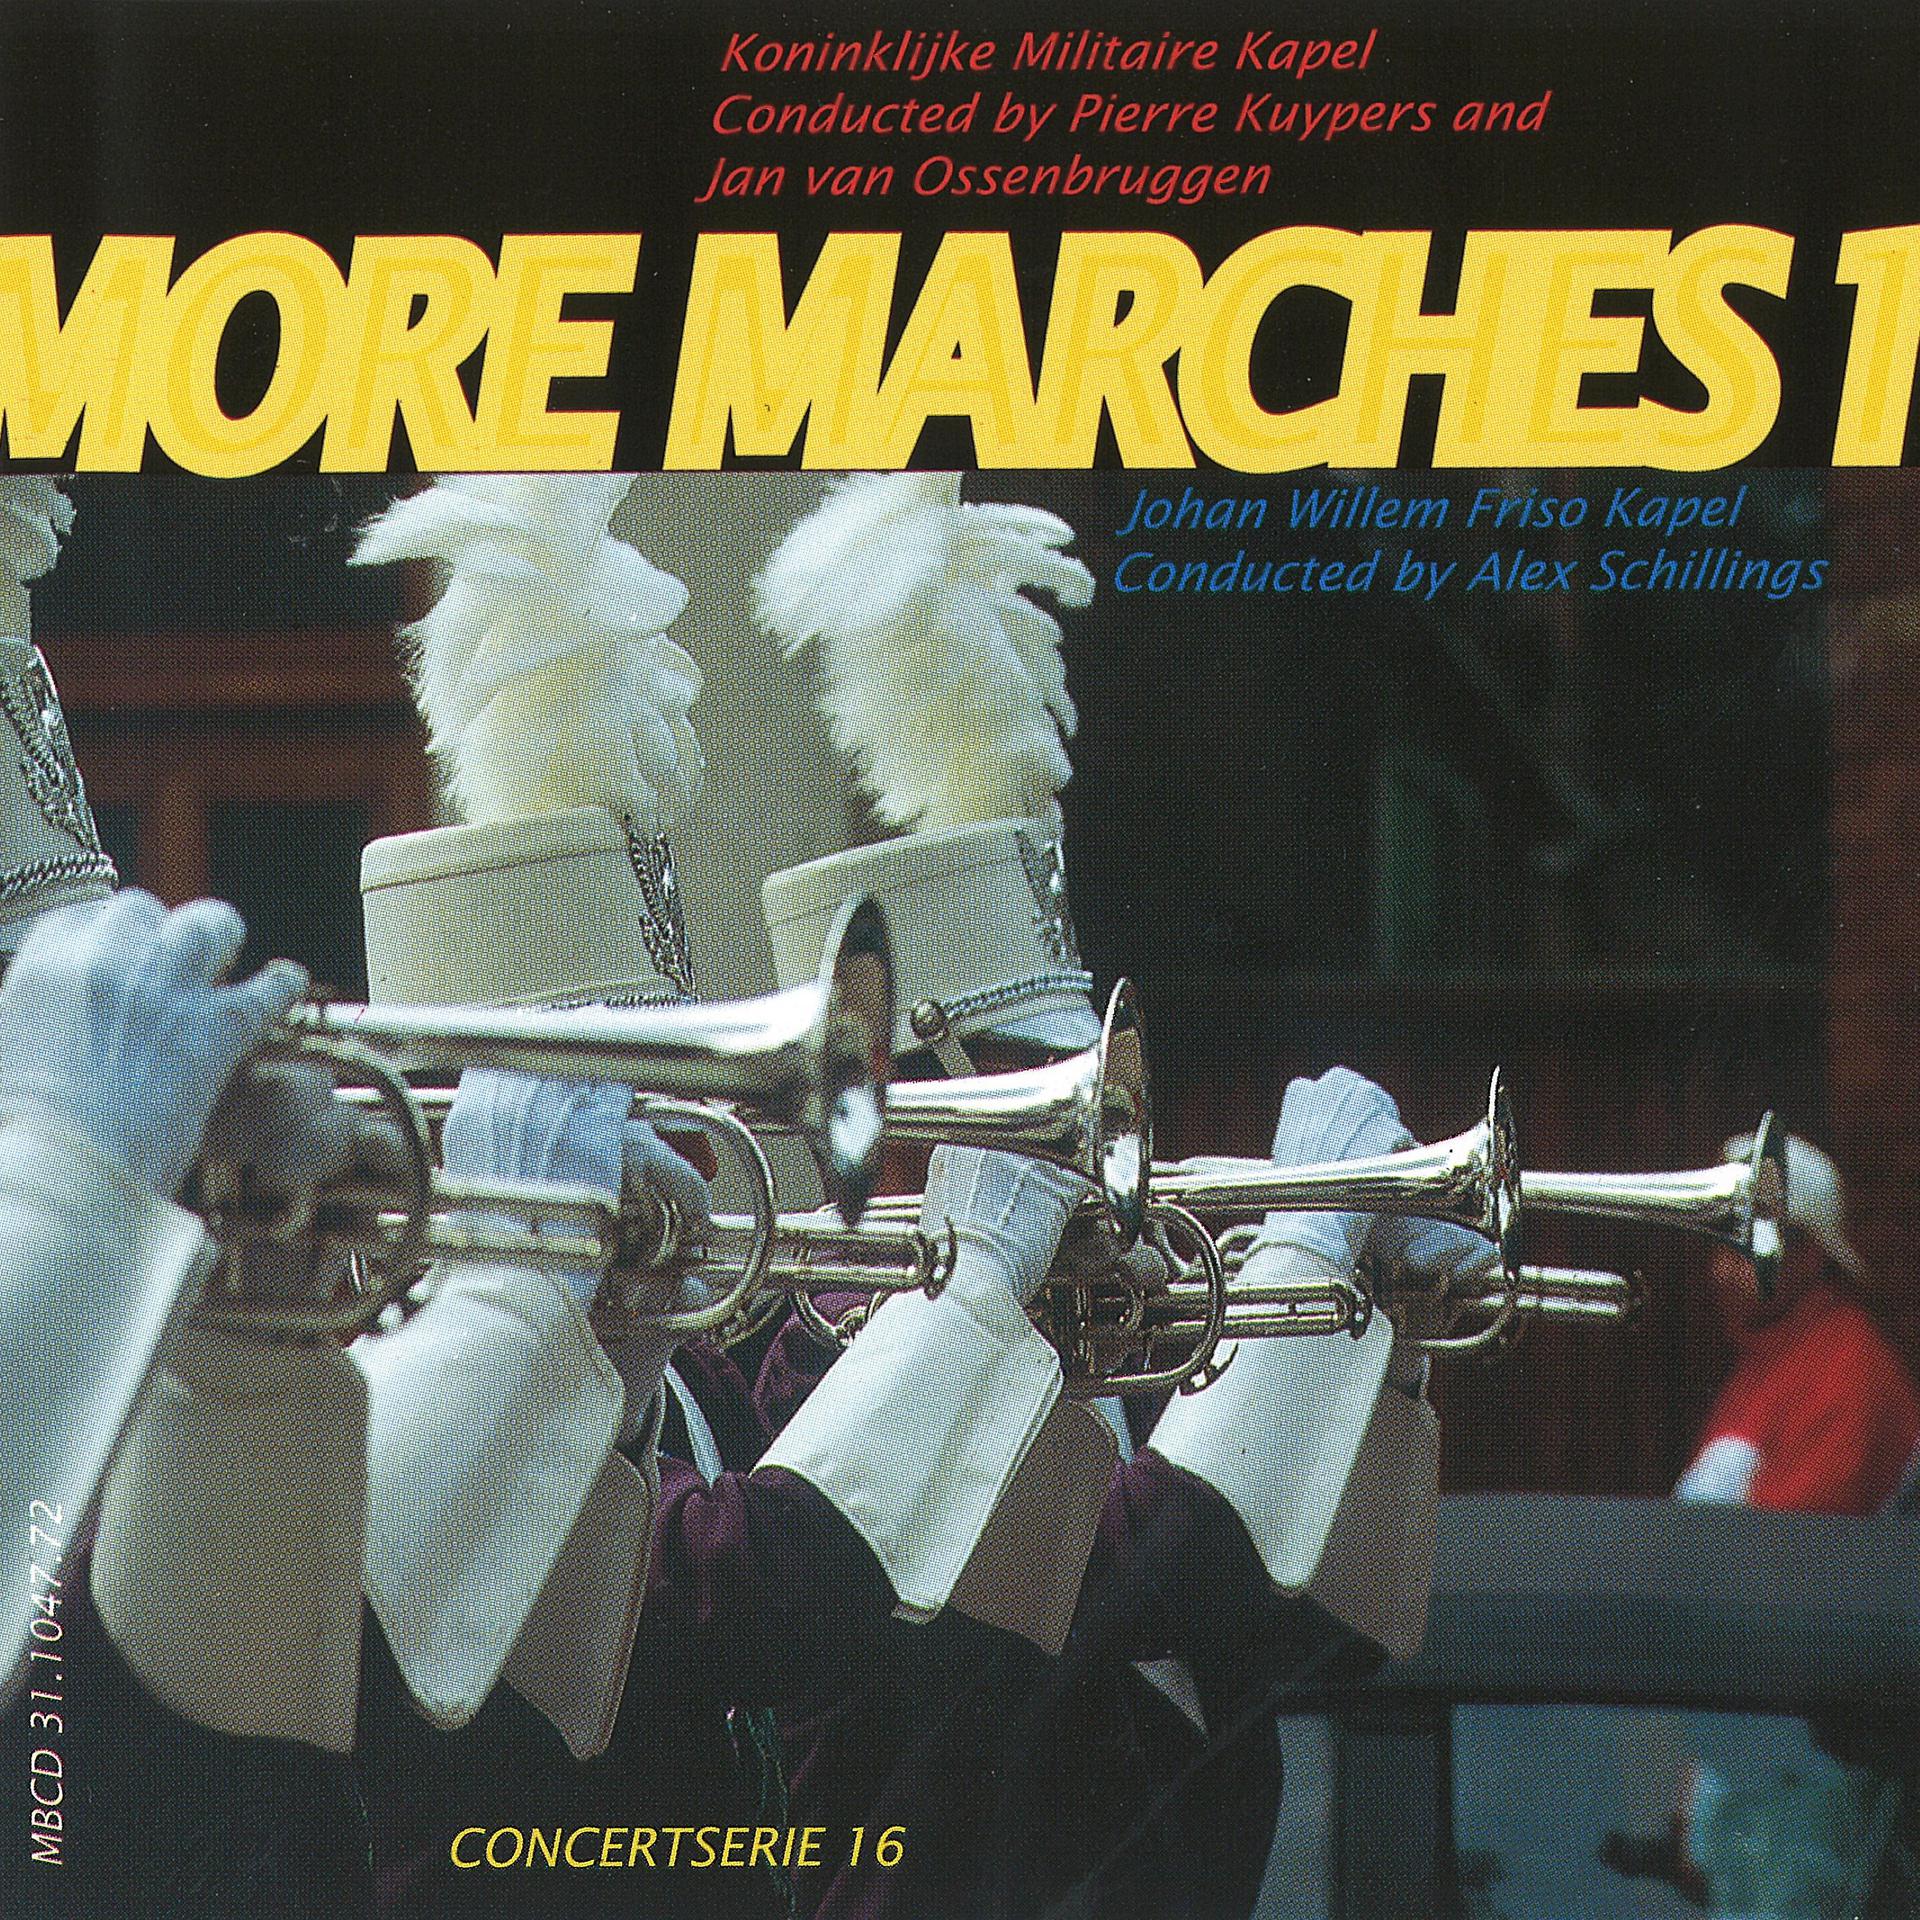 Постер альбома Concert Series 16: More Marches 1